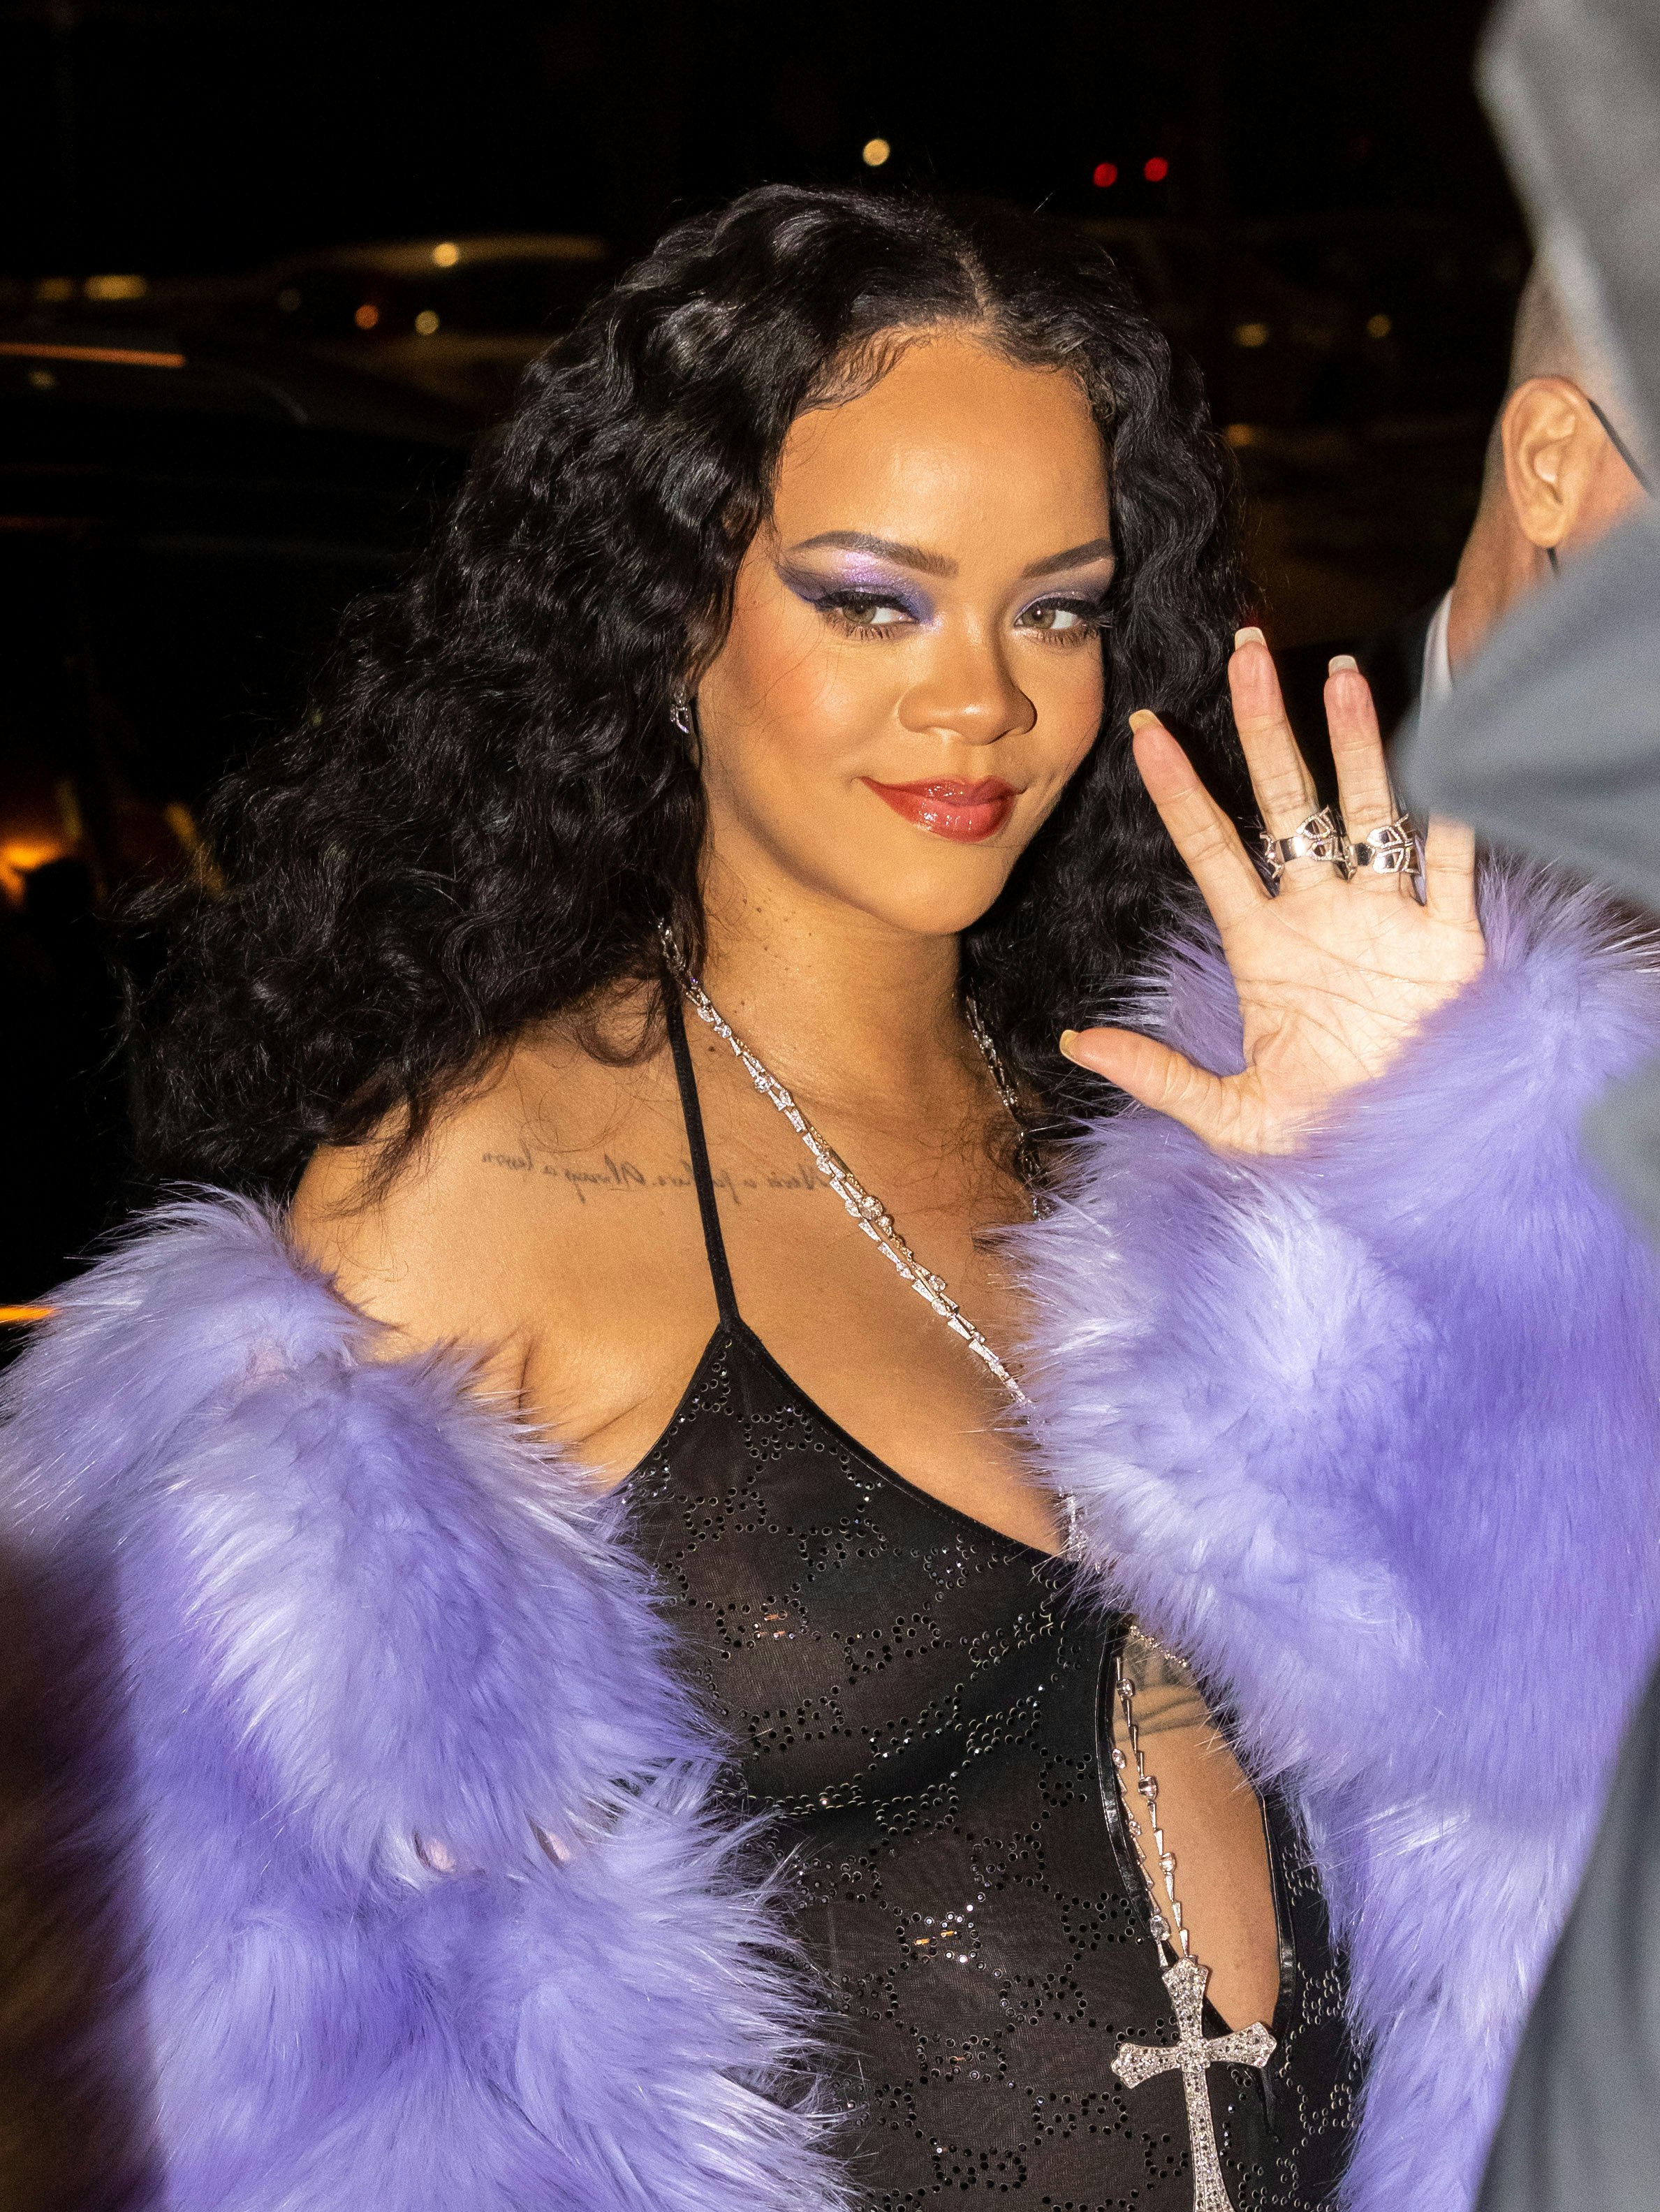 Rihanna's Sheer Dress At The Dior Show Left Little To The Imagination